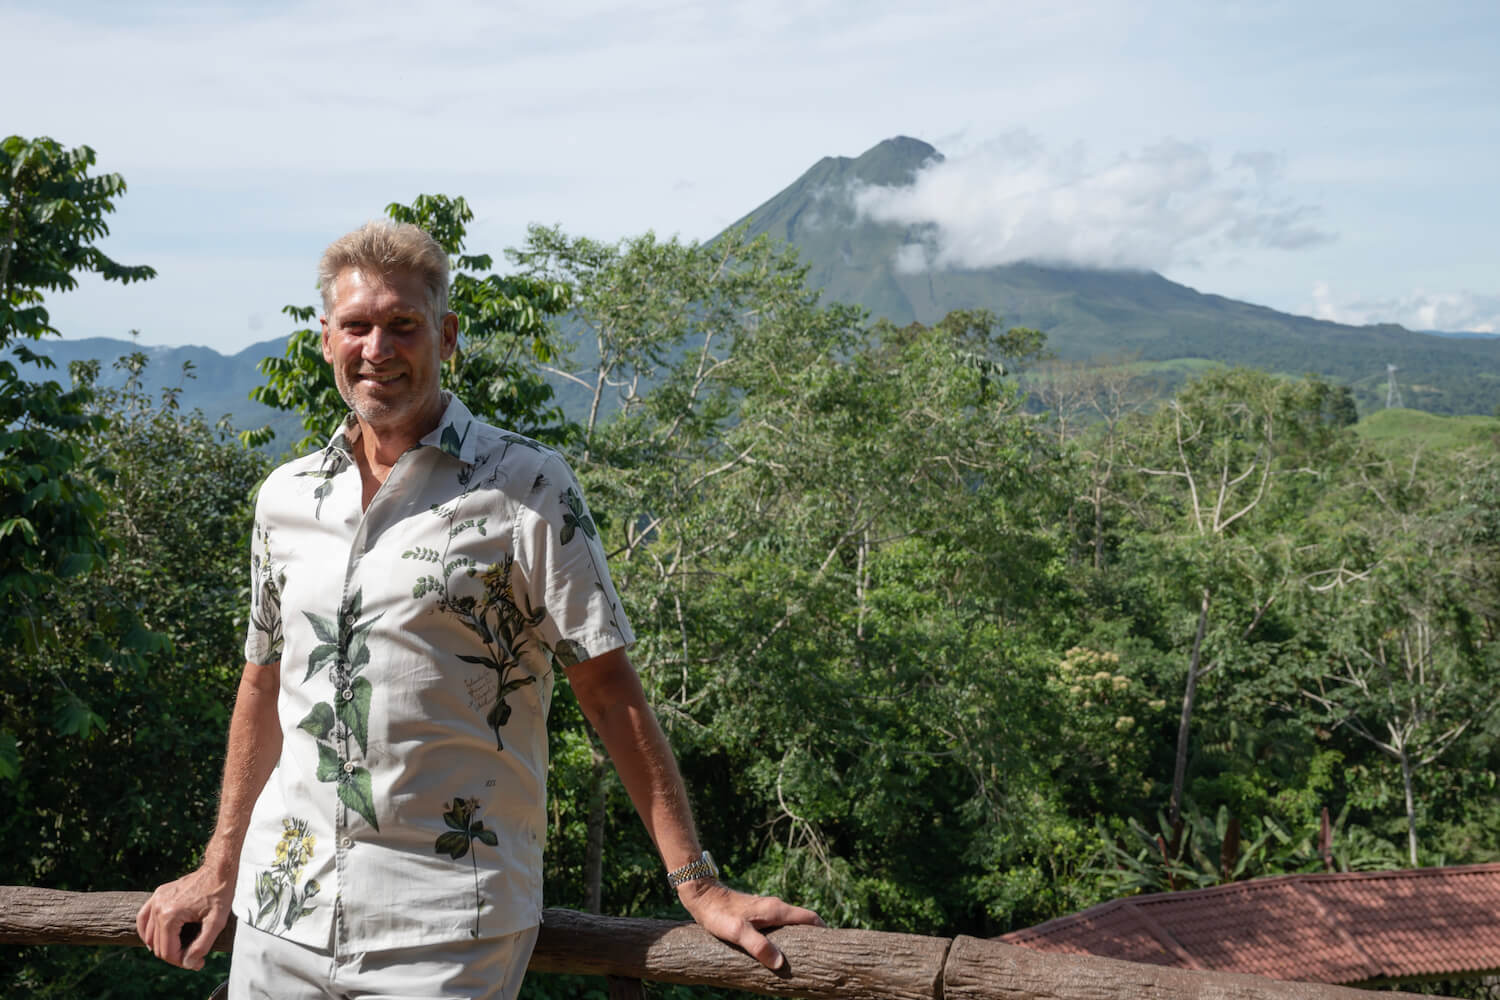 'The Golden Bachelor' star Gerry Turner smiling in Costa Rica with mountains in the background